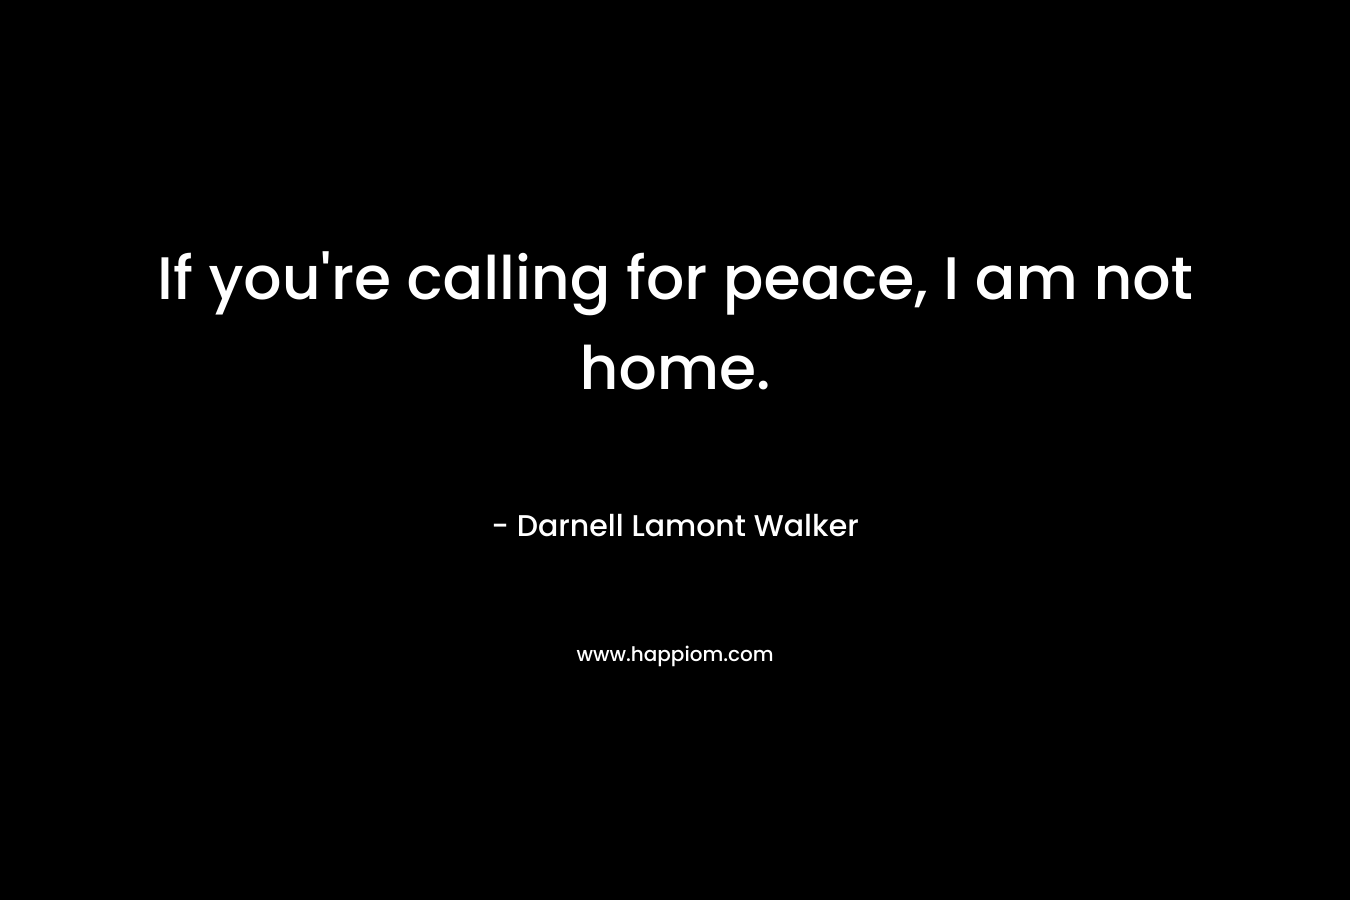 If you're calling for peace, I am not home.